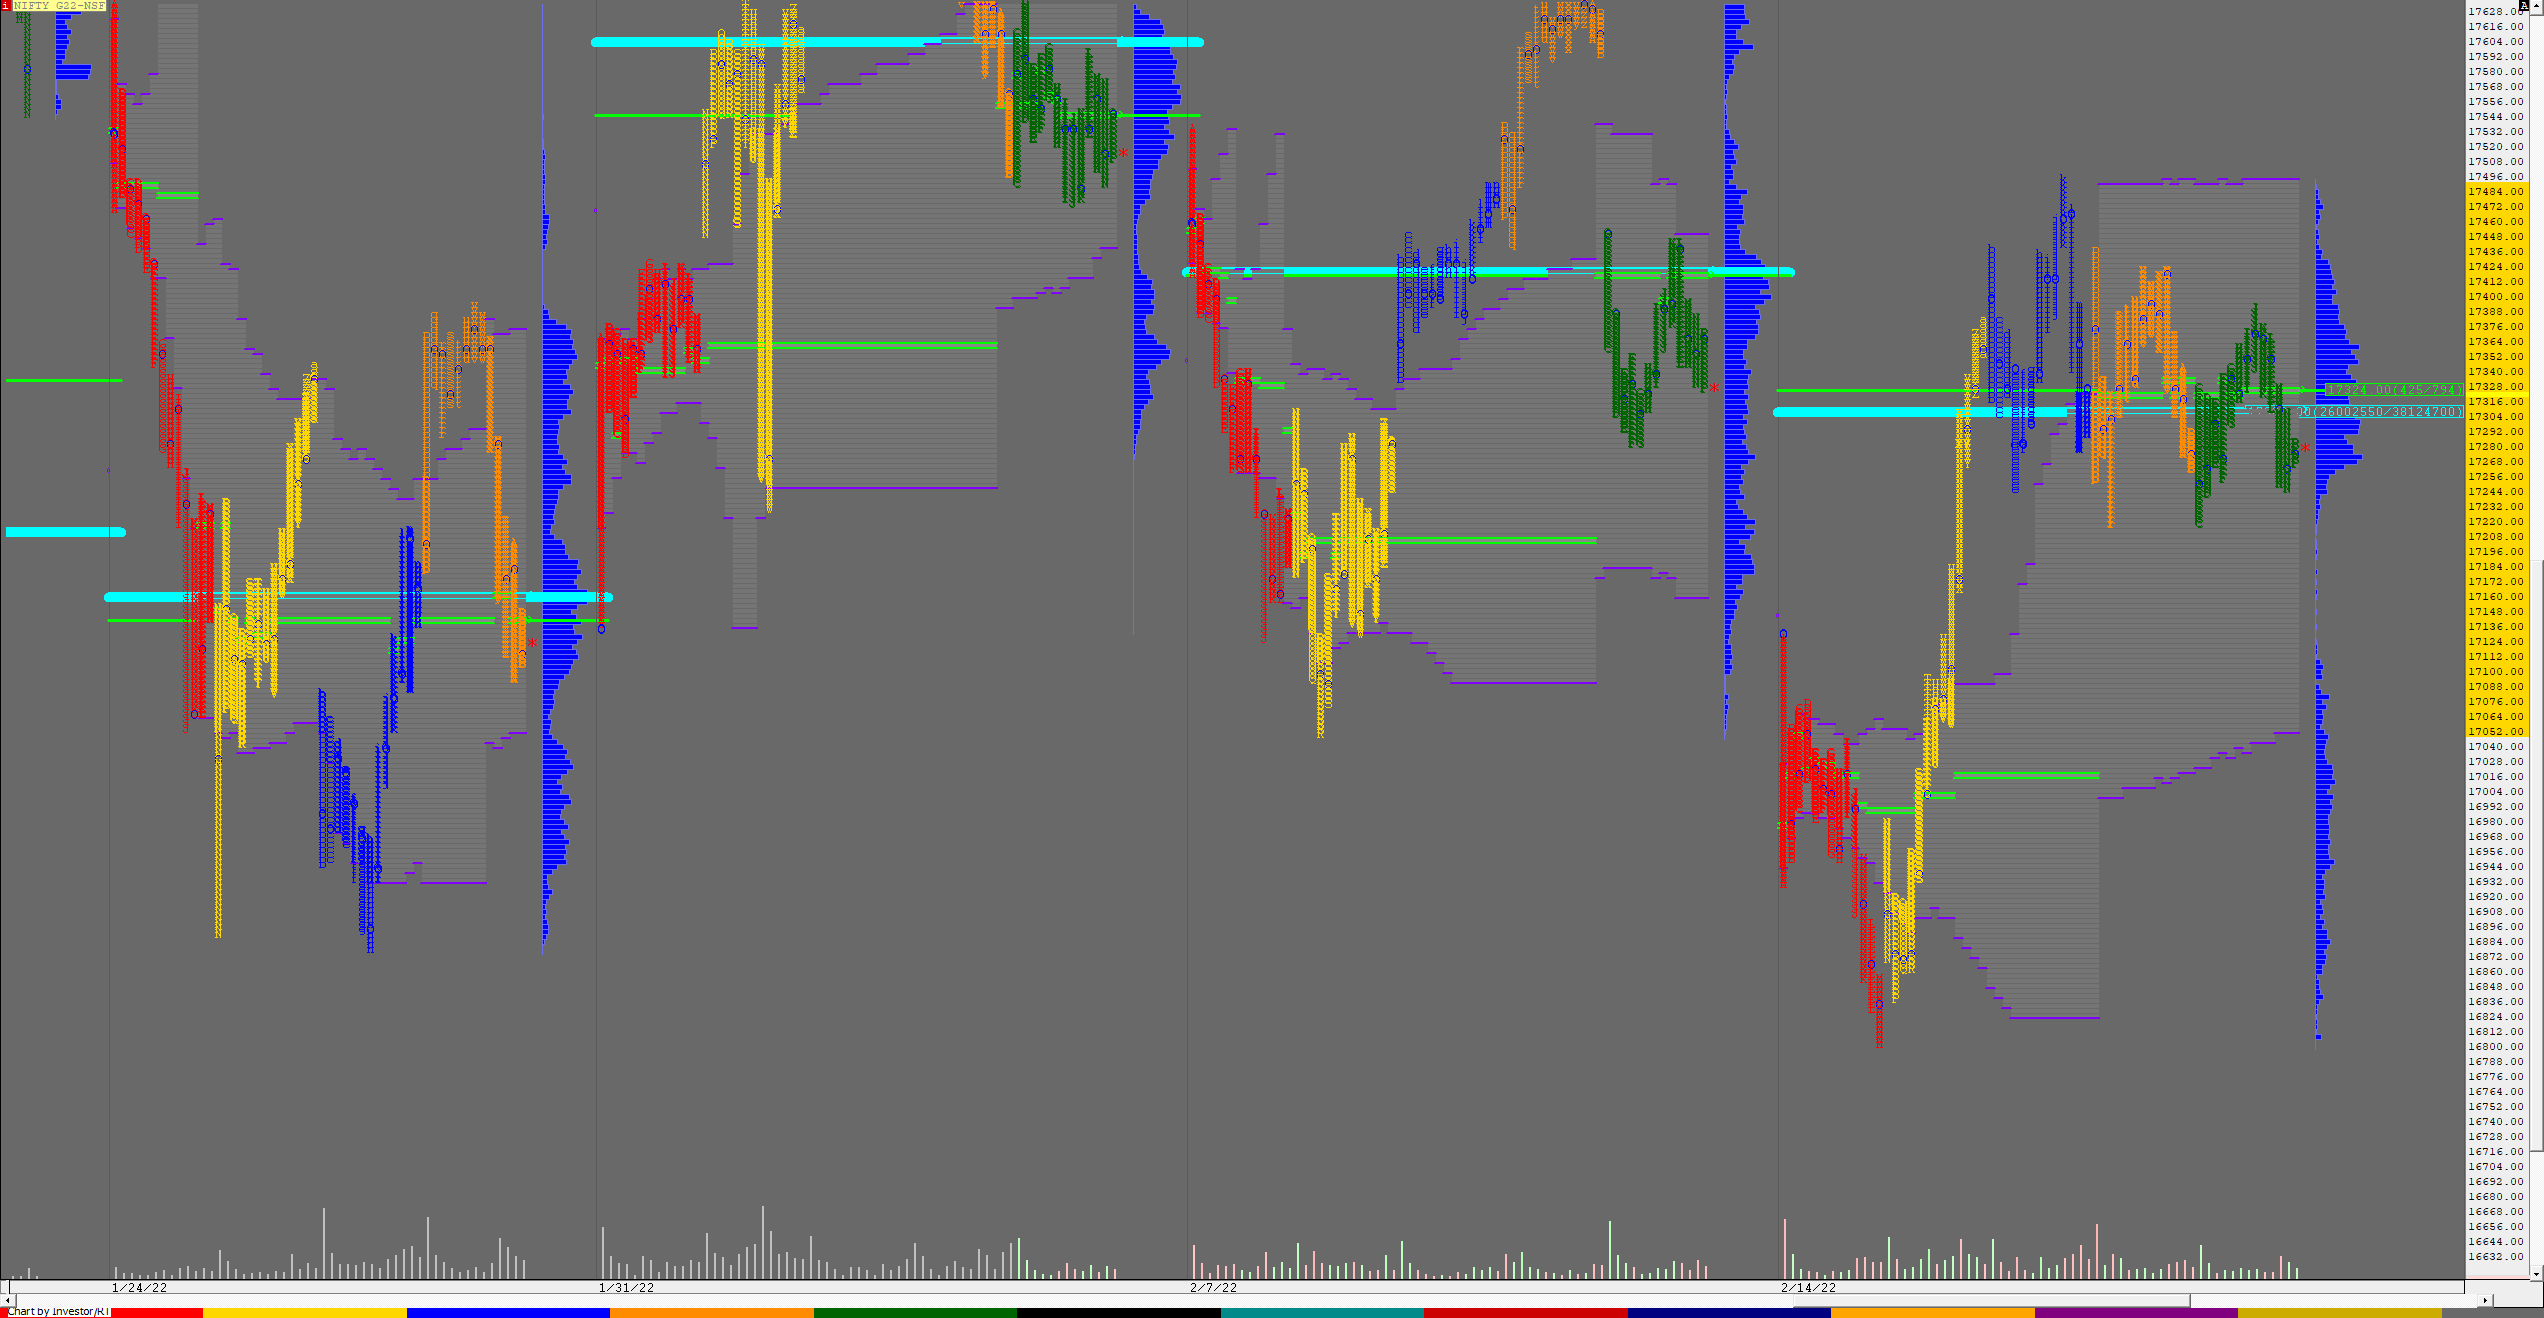 Nf F 2 Weekly Charts (14Th To 18Th Feb 2022) And Market Profile Analysis Banknifty Futures, Charts, Day Trading, Intraday Trading, Intraday Trading Strategies, Market Profile, Market Profile Trading Strategies, Nifty Futures, Order Flow Analysis, Support And Resistance, Technical Analysis, Trading Strategies, Volume Profile Trading